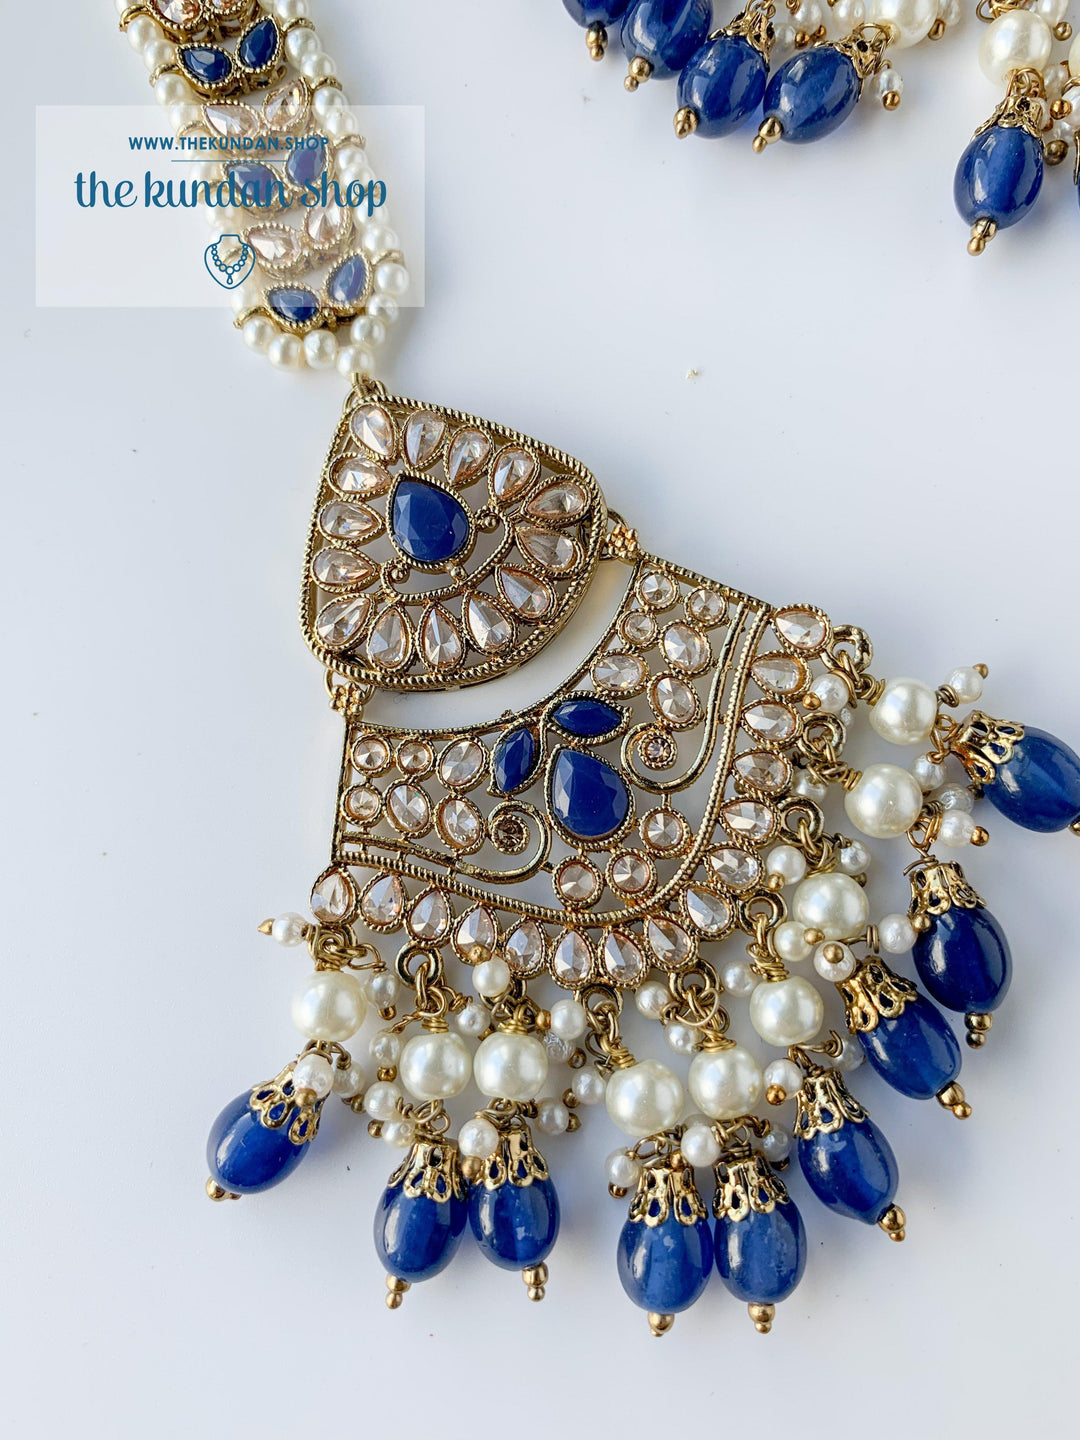 Locked In, In Midnight Blue Necklace Sets THE KUNDAN SHOP 